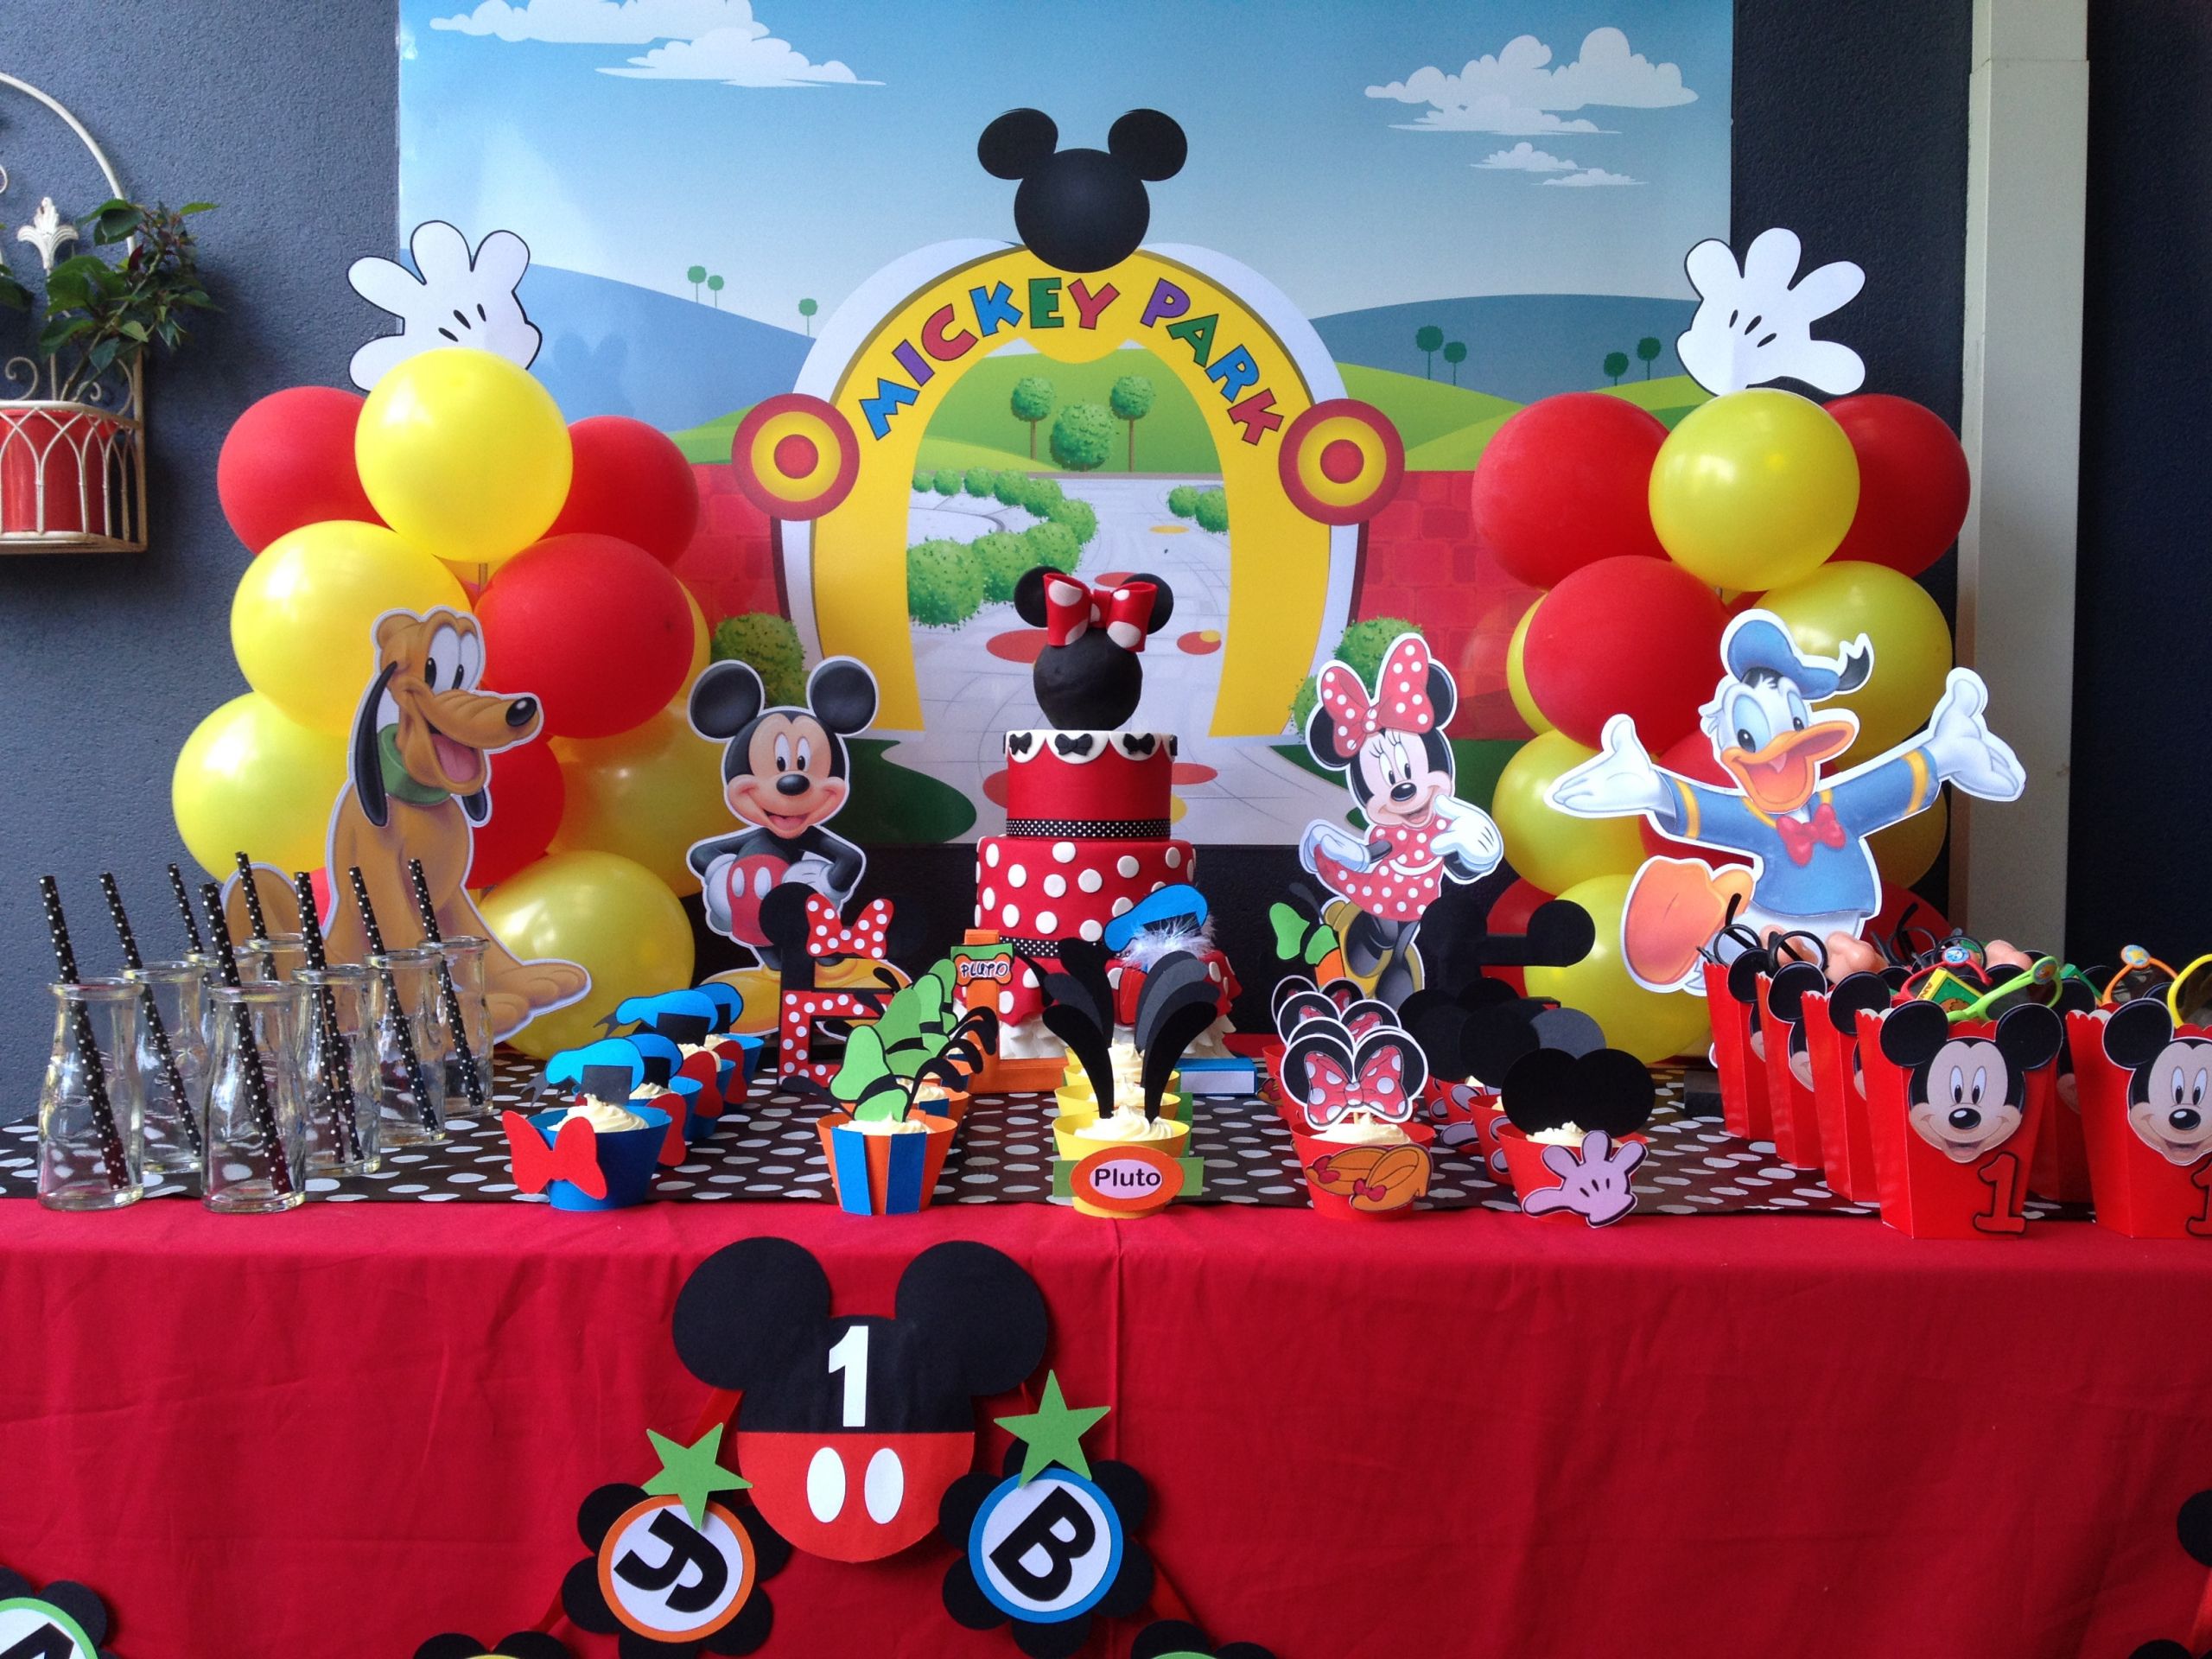 Mickey Mouse Clubhouse Birthday Party Decorations
 How to plan a Mickey Mouse Birthday party celebration for